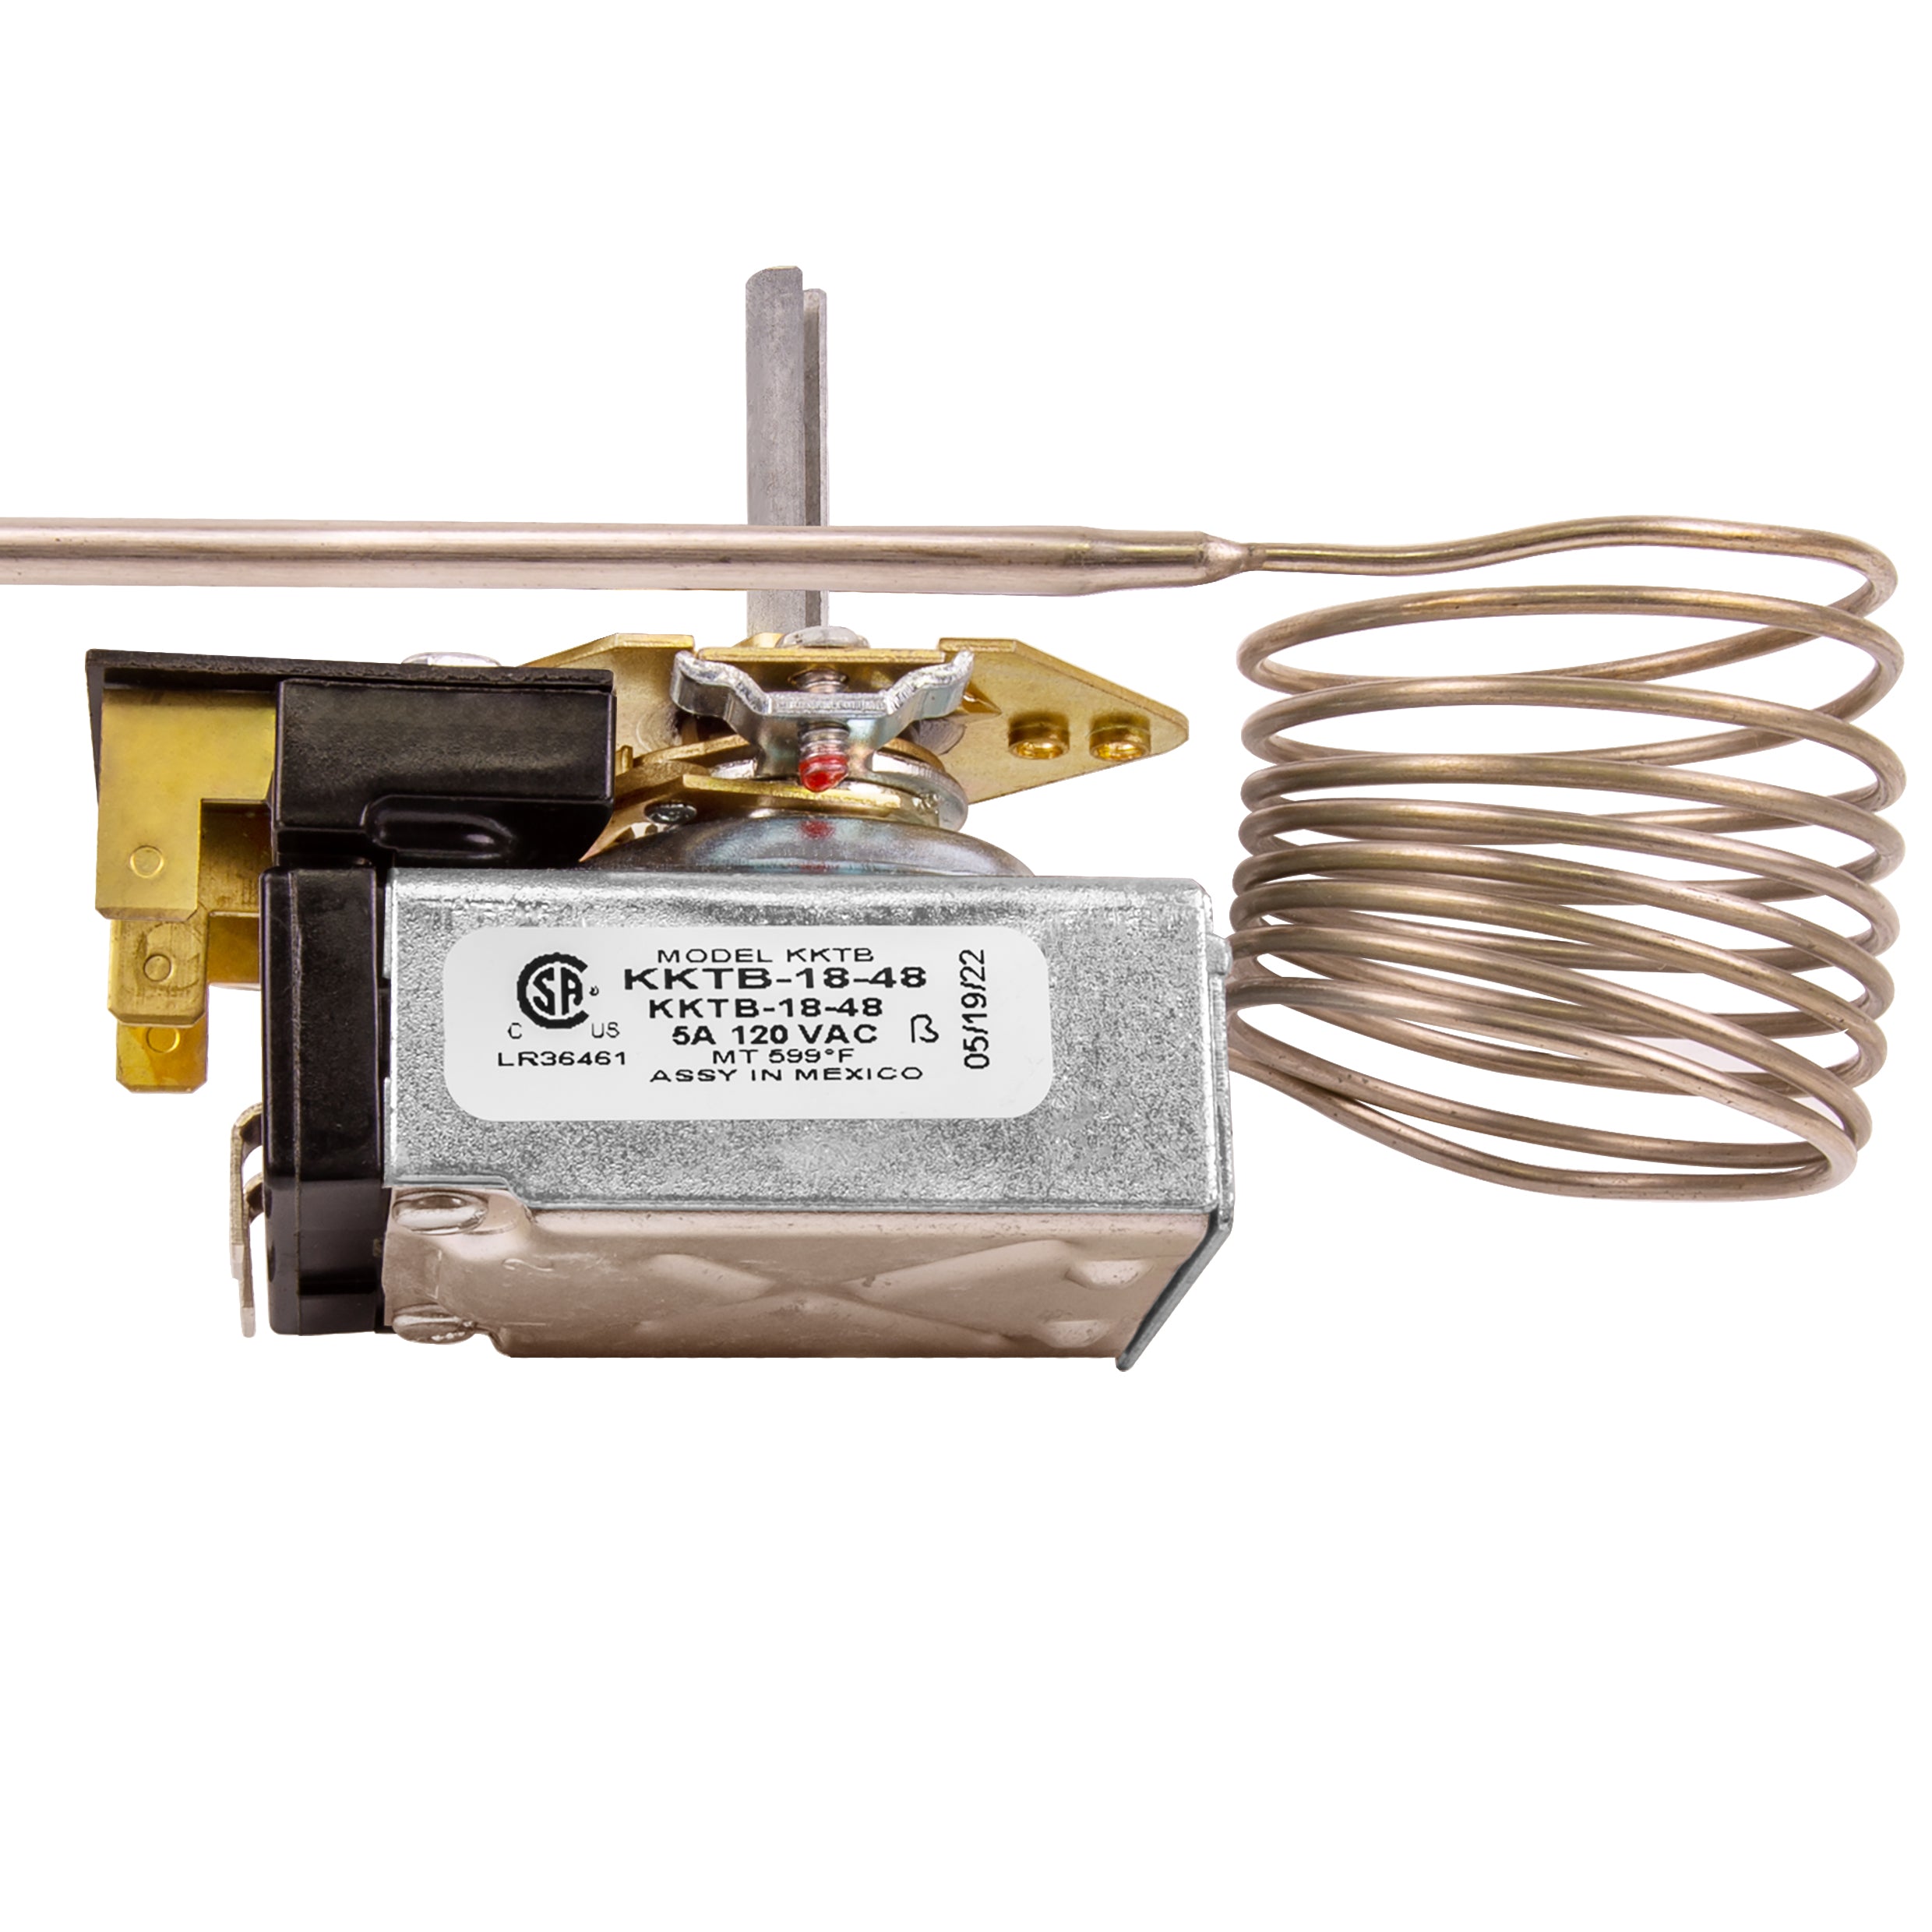 Robertshaw KKTB-18-48 Stove Oven Range Thermostat 5A 120VAC Max Temp 599°F for Awoco and Other GAS Range Stoves